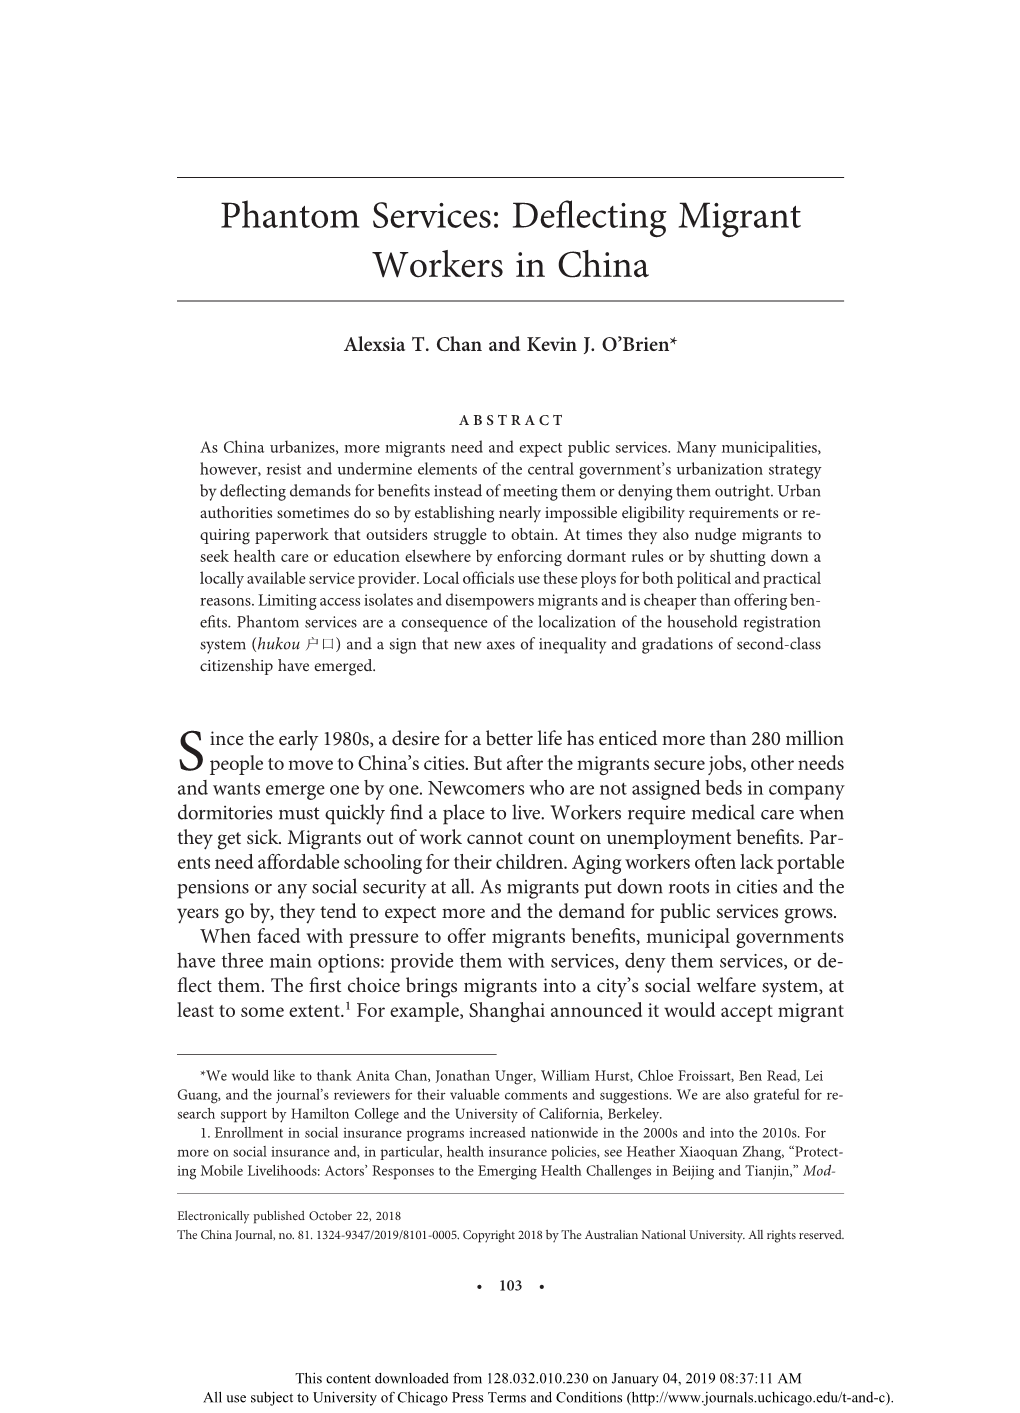 Phantom Services: Deflecting Migrant Workers in China